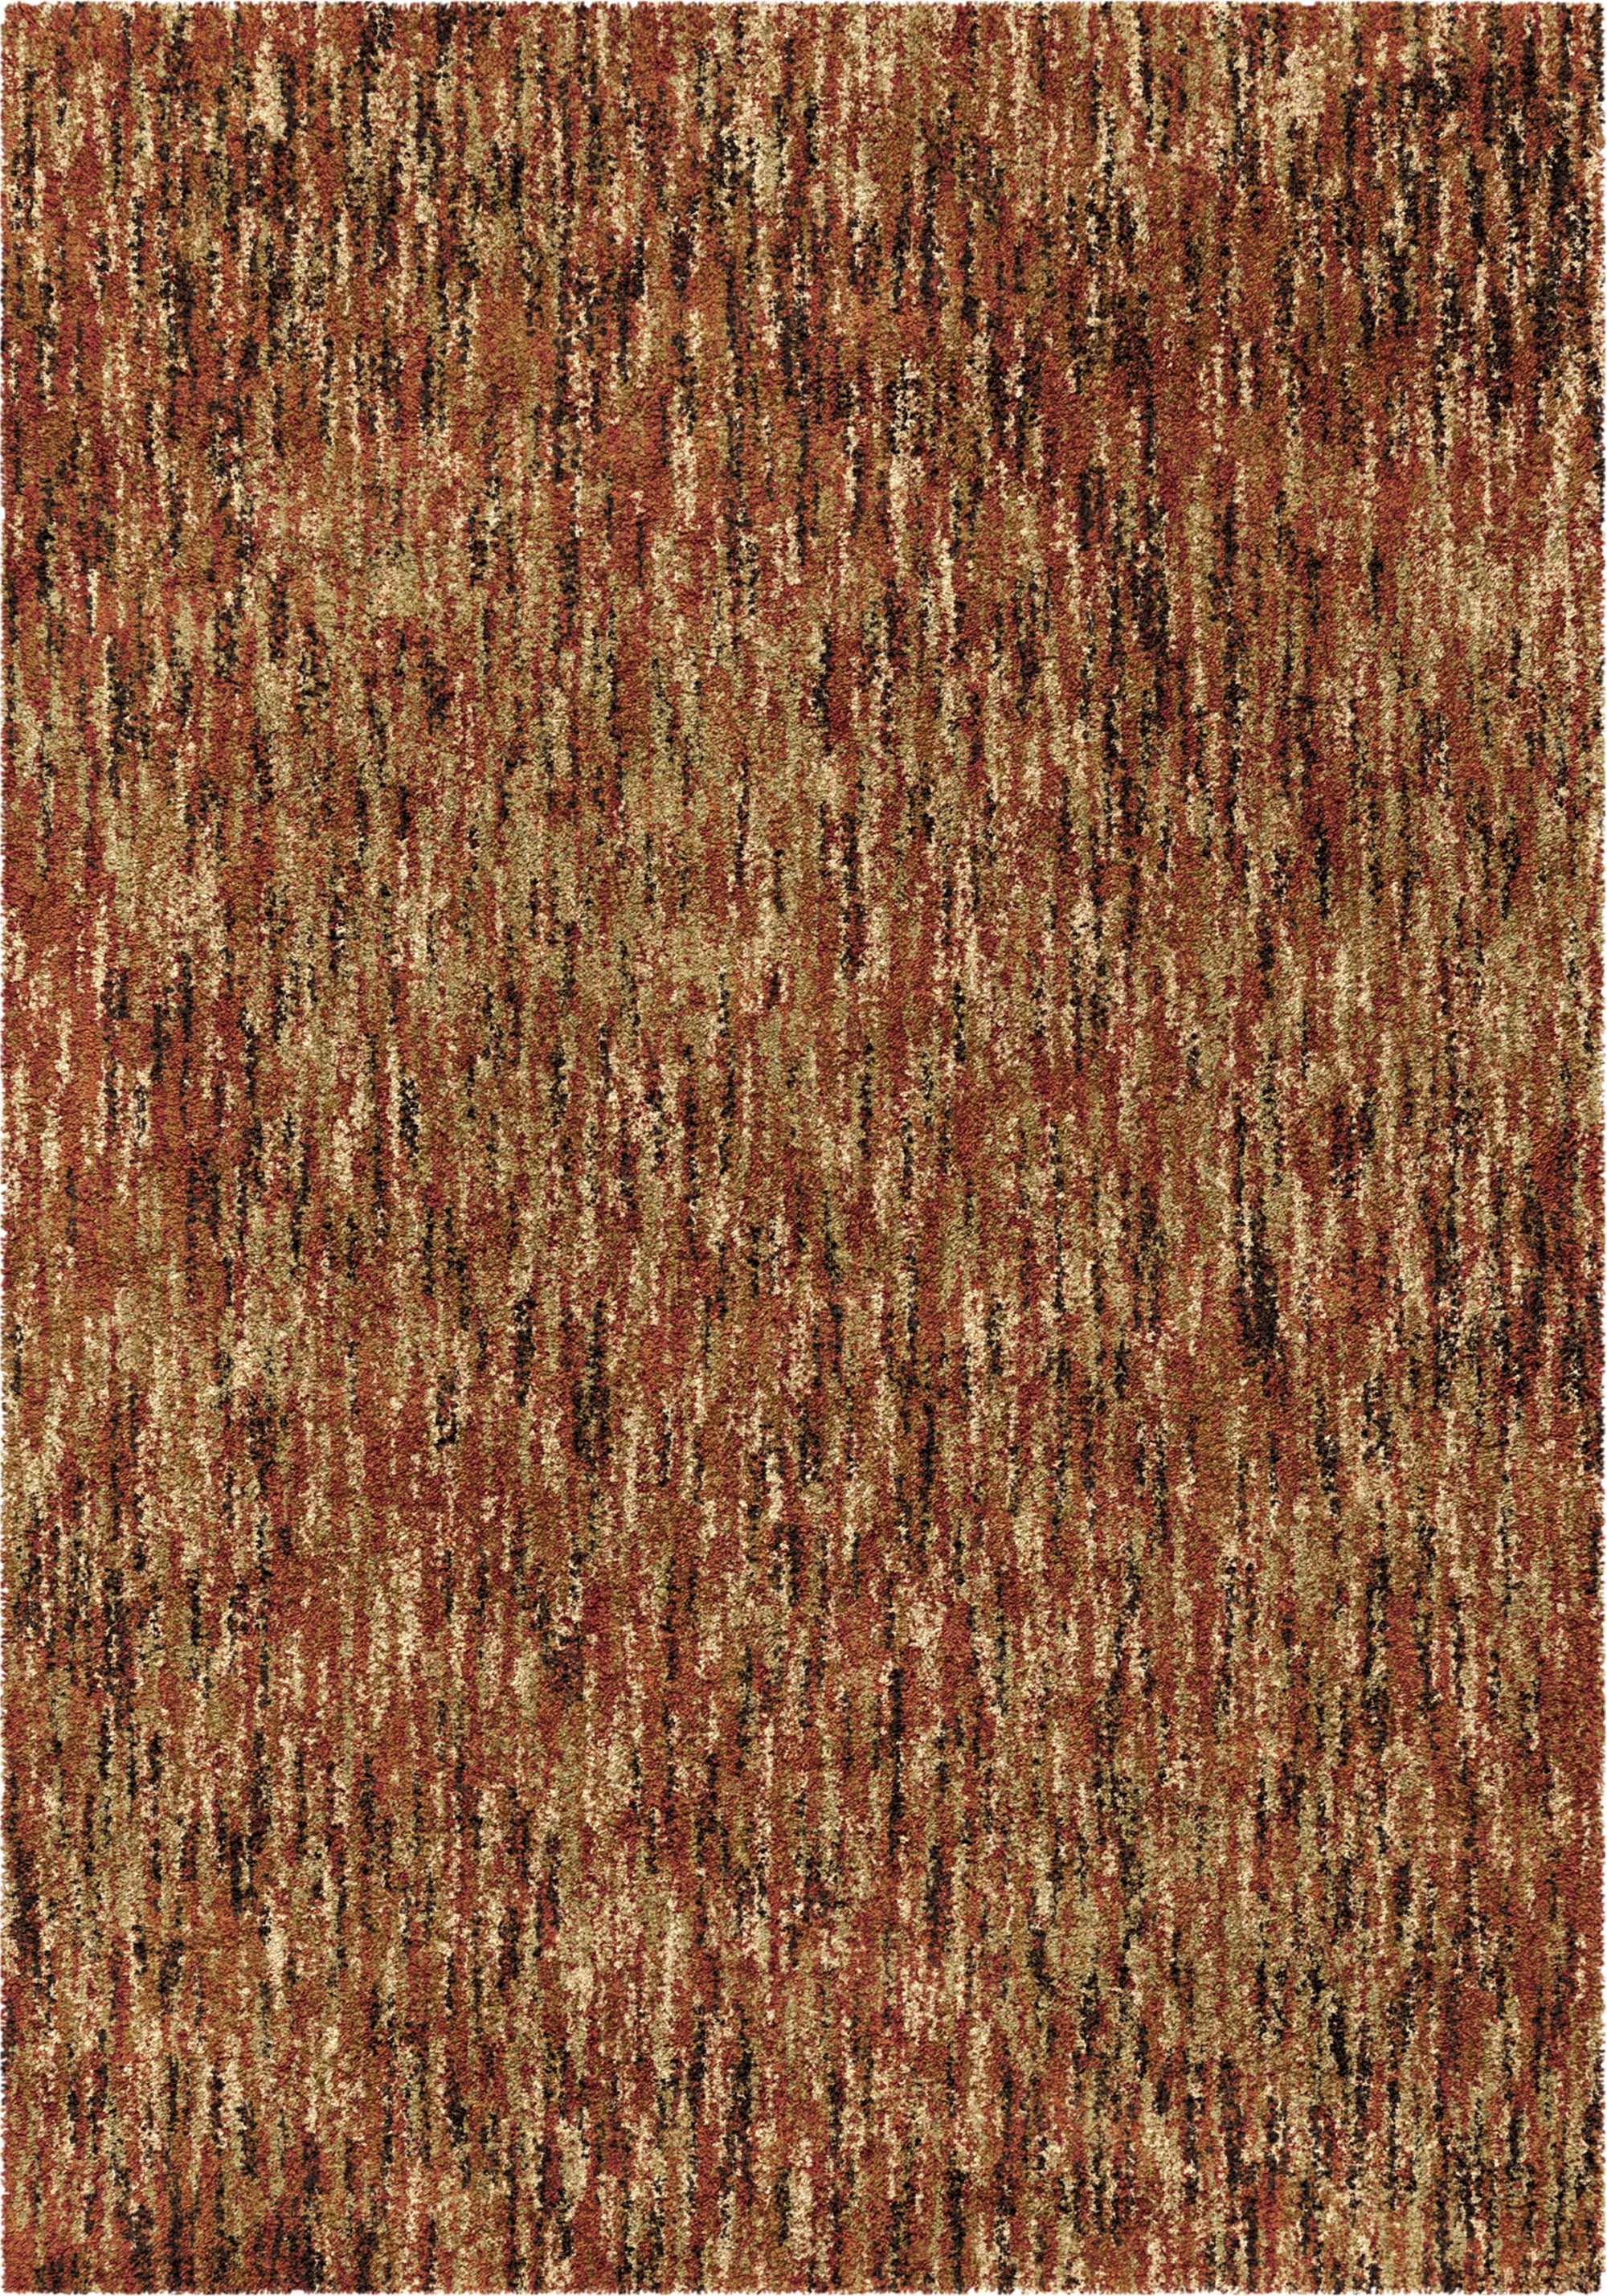 Palmetto Living Next Generation Multi solid Red Area Rug - 7'10" x 10'10"